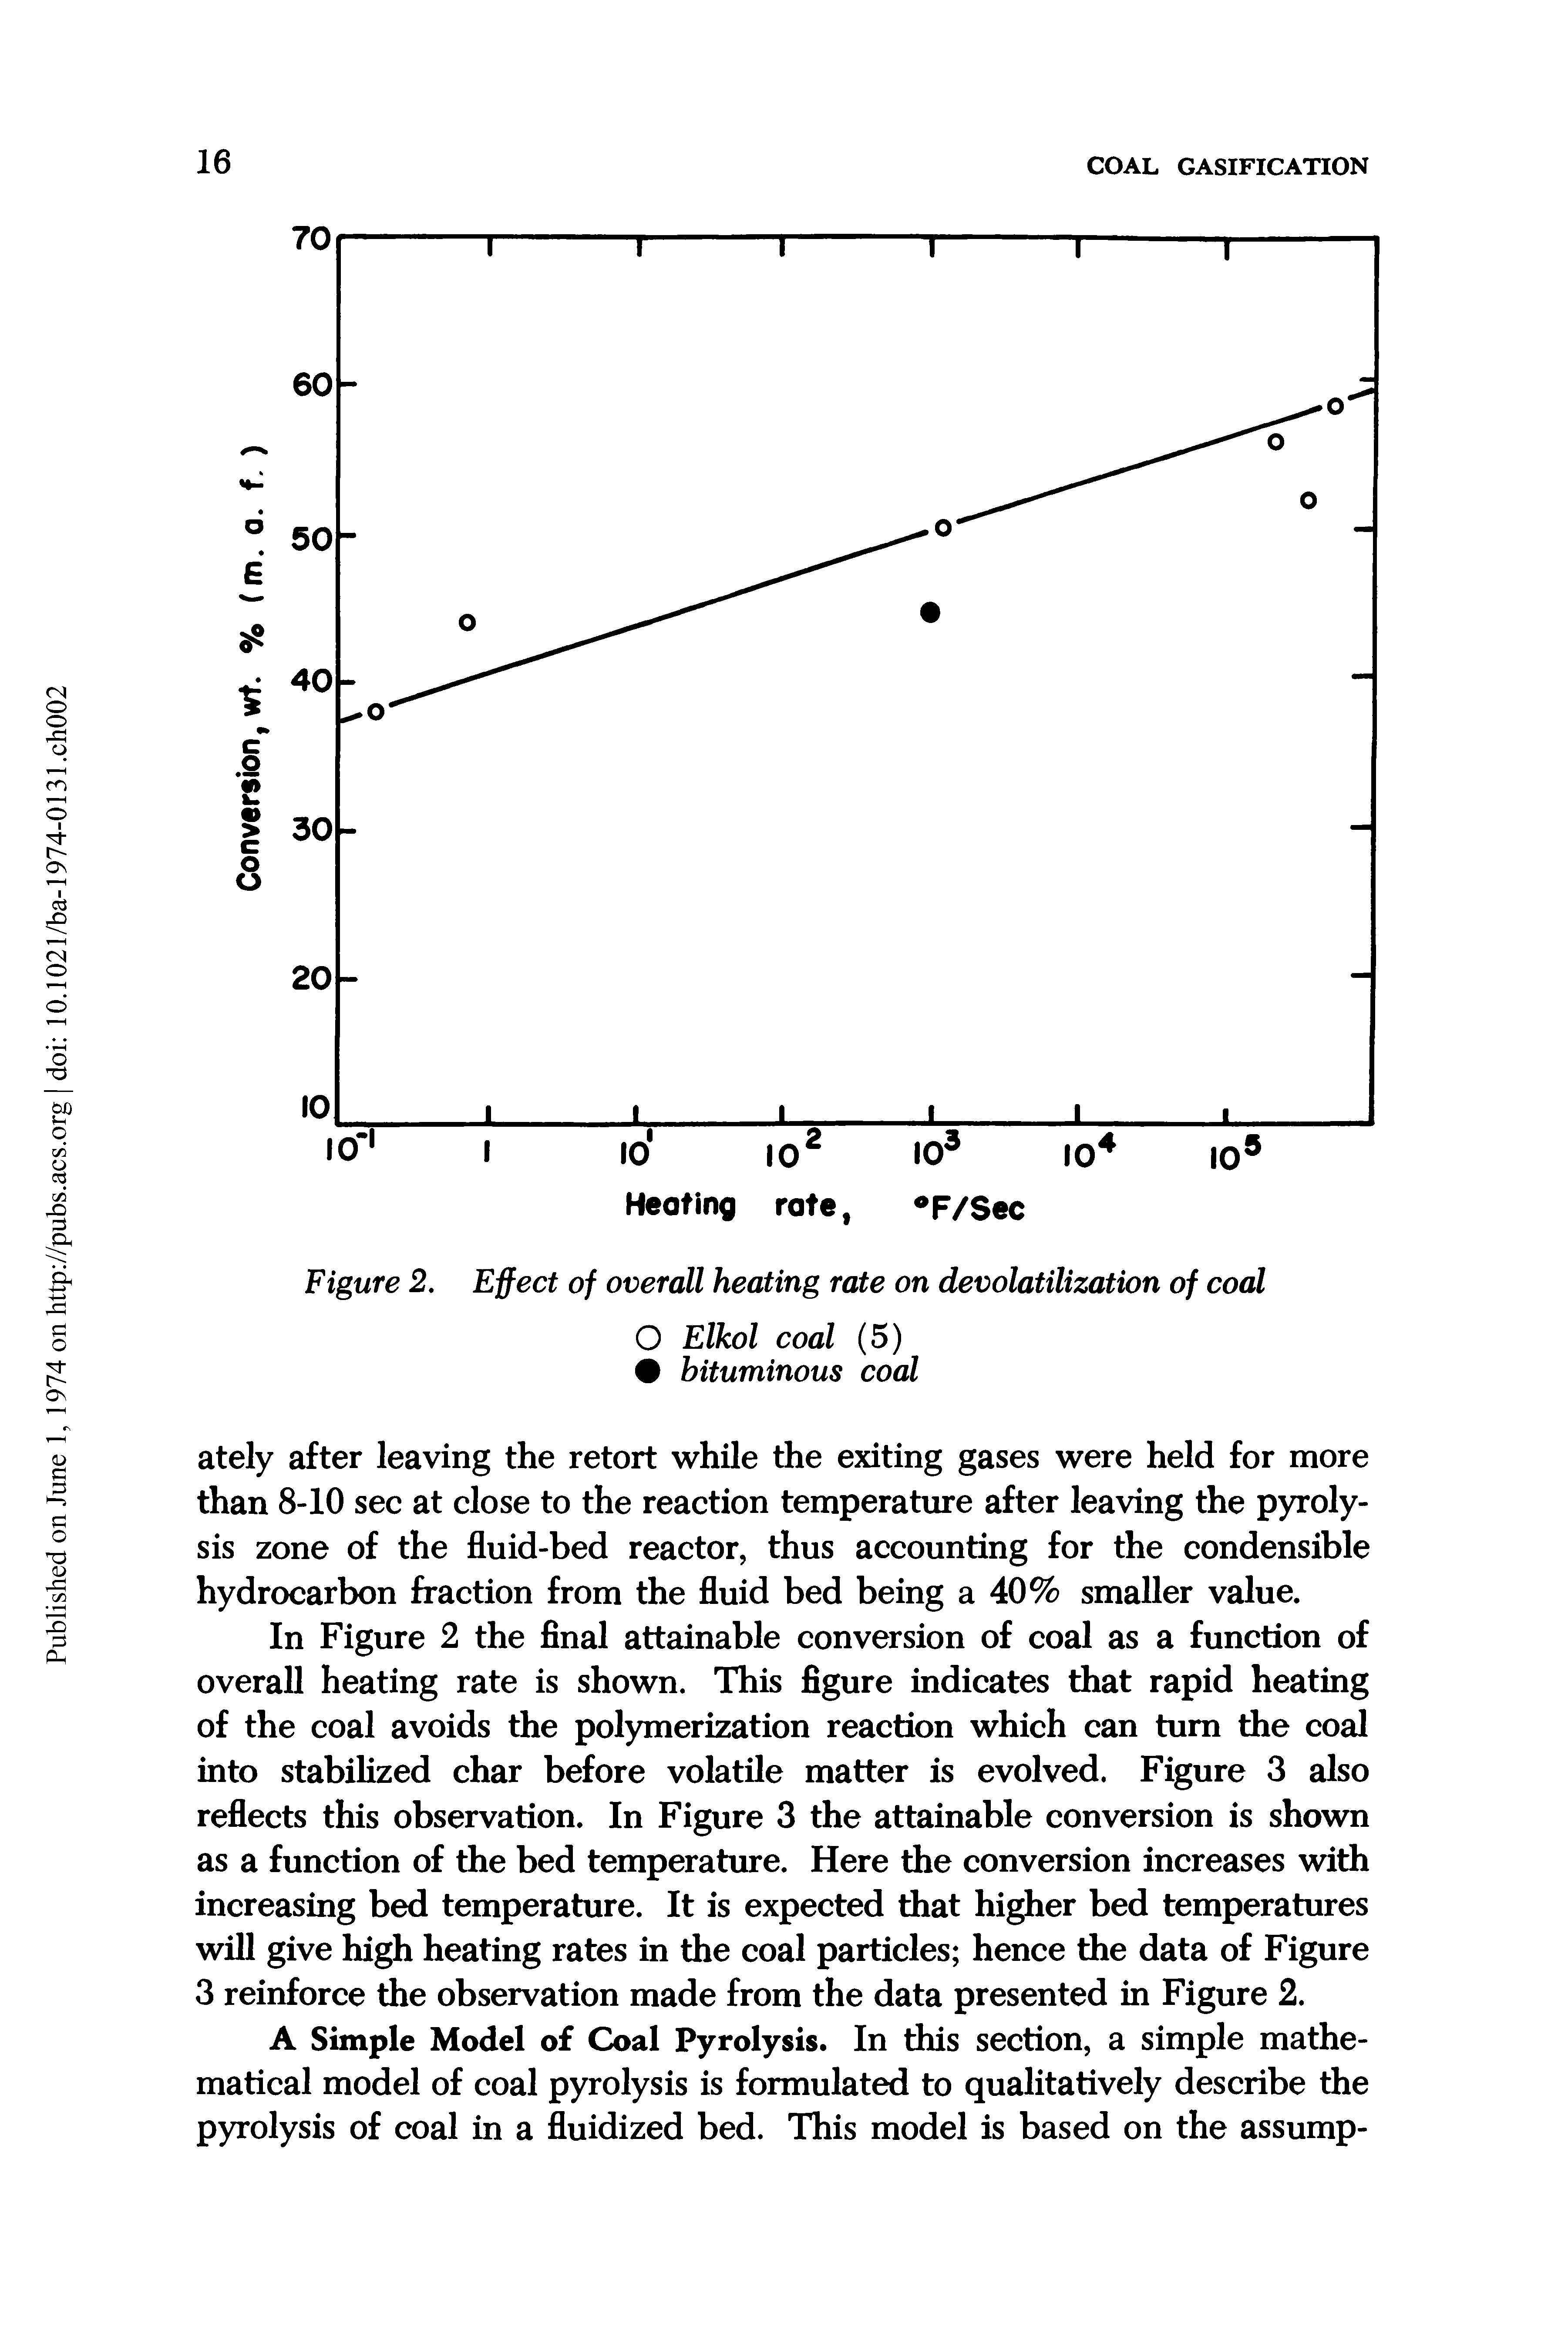 Figure 2. Effect of overall heating rate on devolatilization of coal...